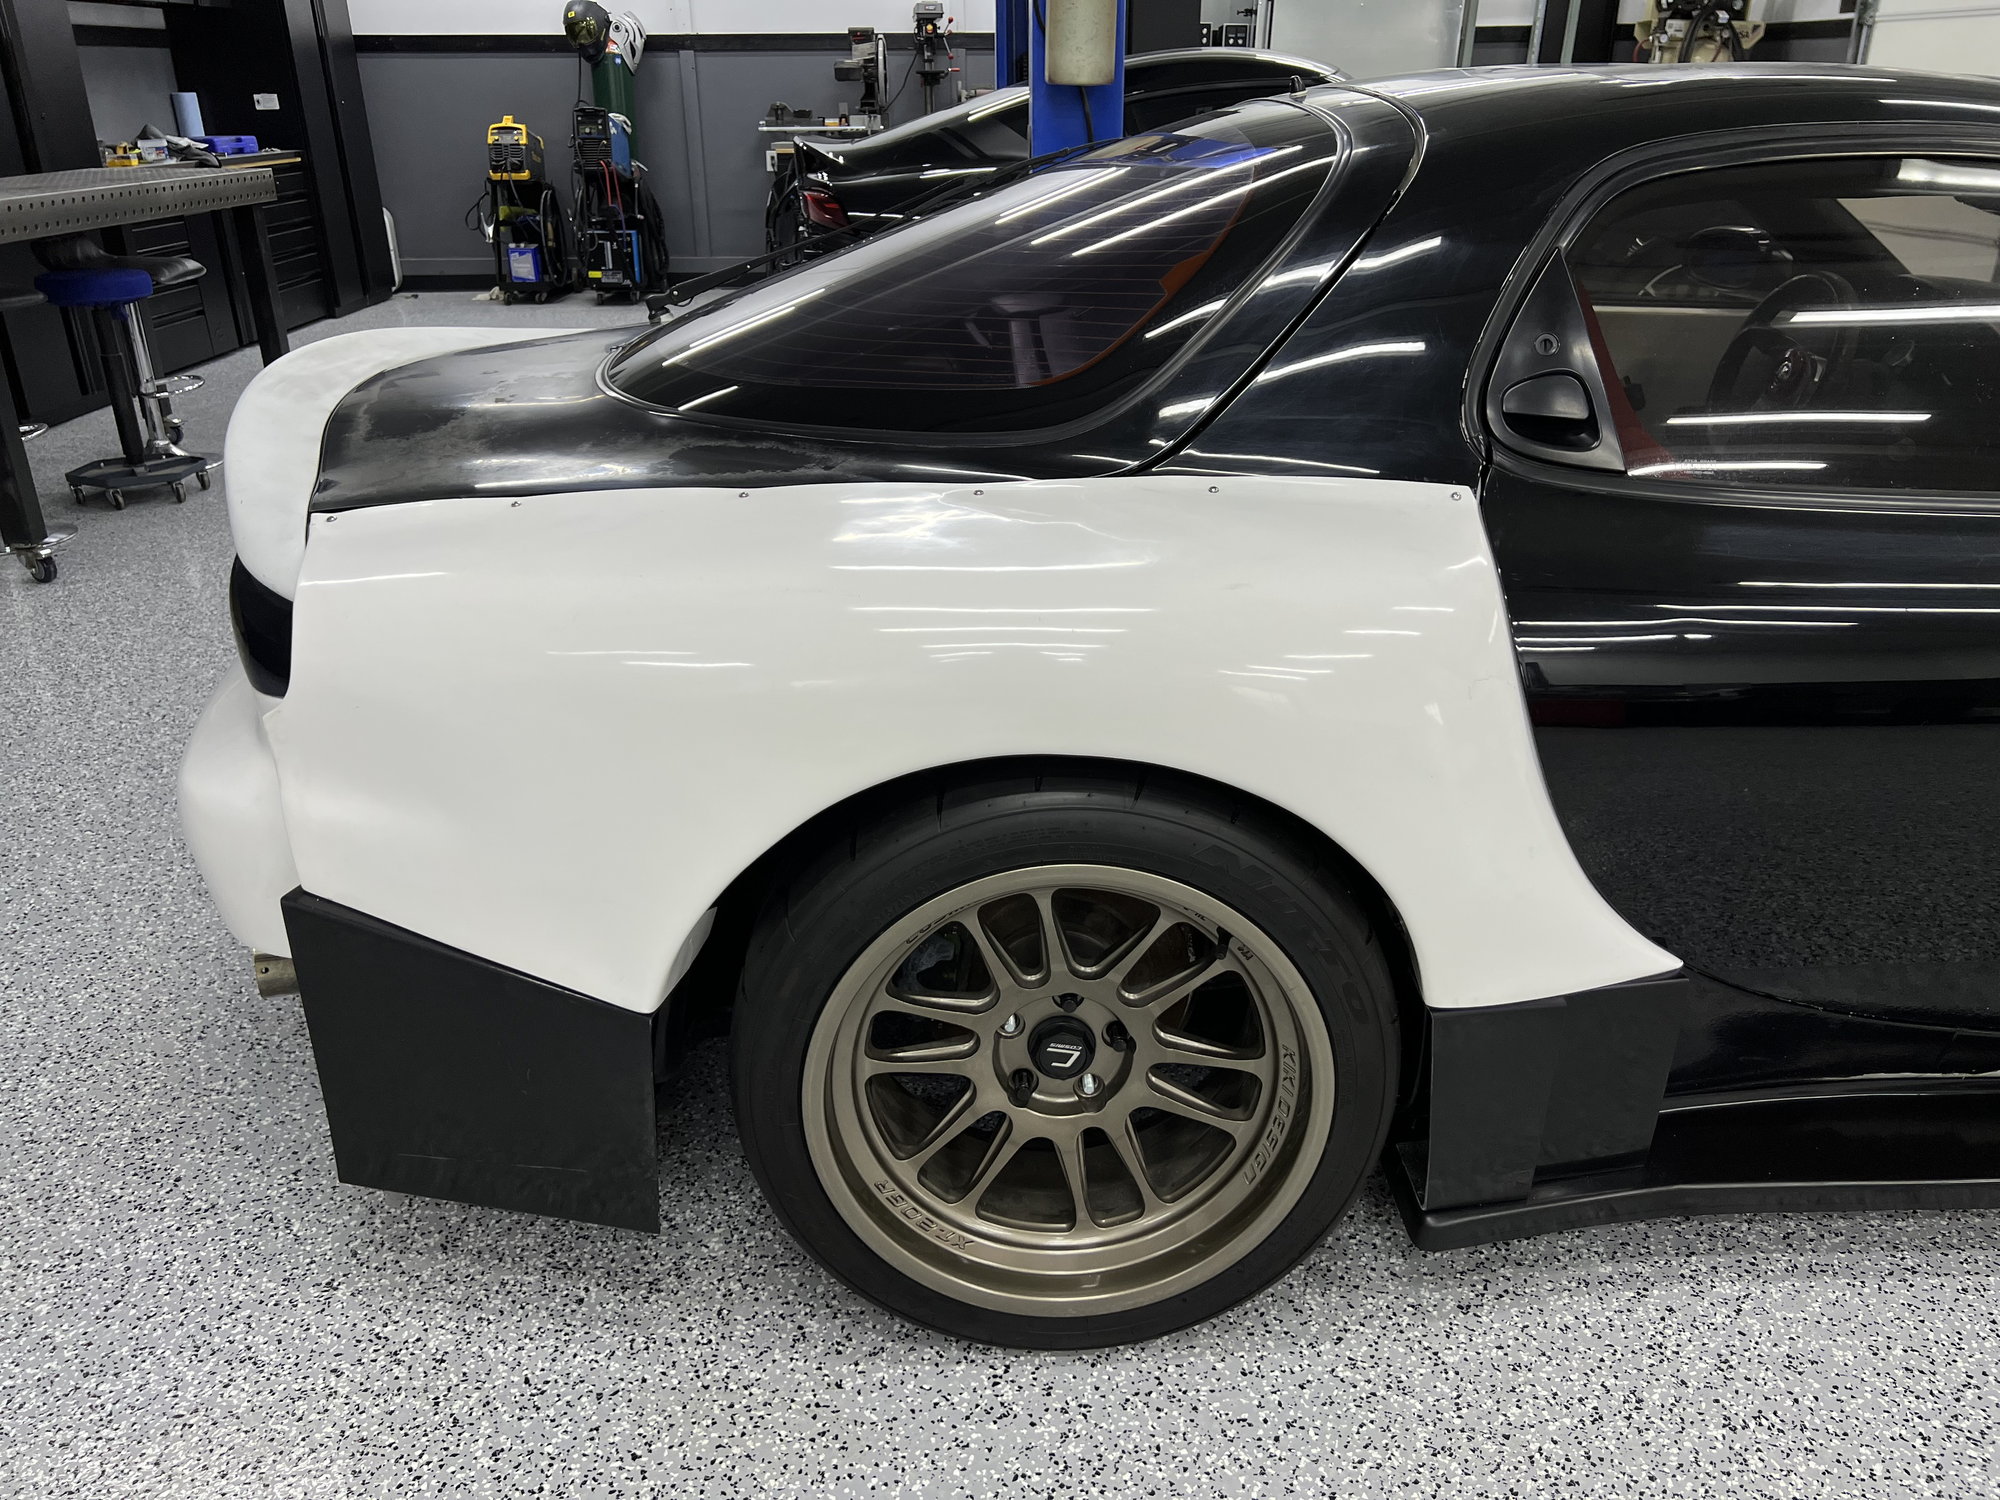 1993 Mazda RX-7 - 1993 Rx7 FD - widebody - single turbo - fuel cell - highly modified - Used - VIN JM1FD3315P0208924 - 95,000 Miles - Other - 2WD - Manual - Black - Louisville, KY 40214, United States